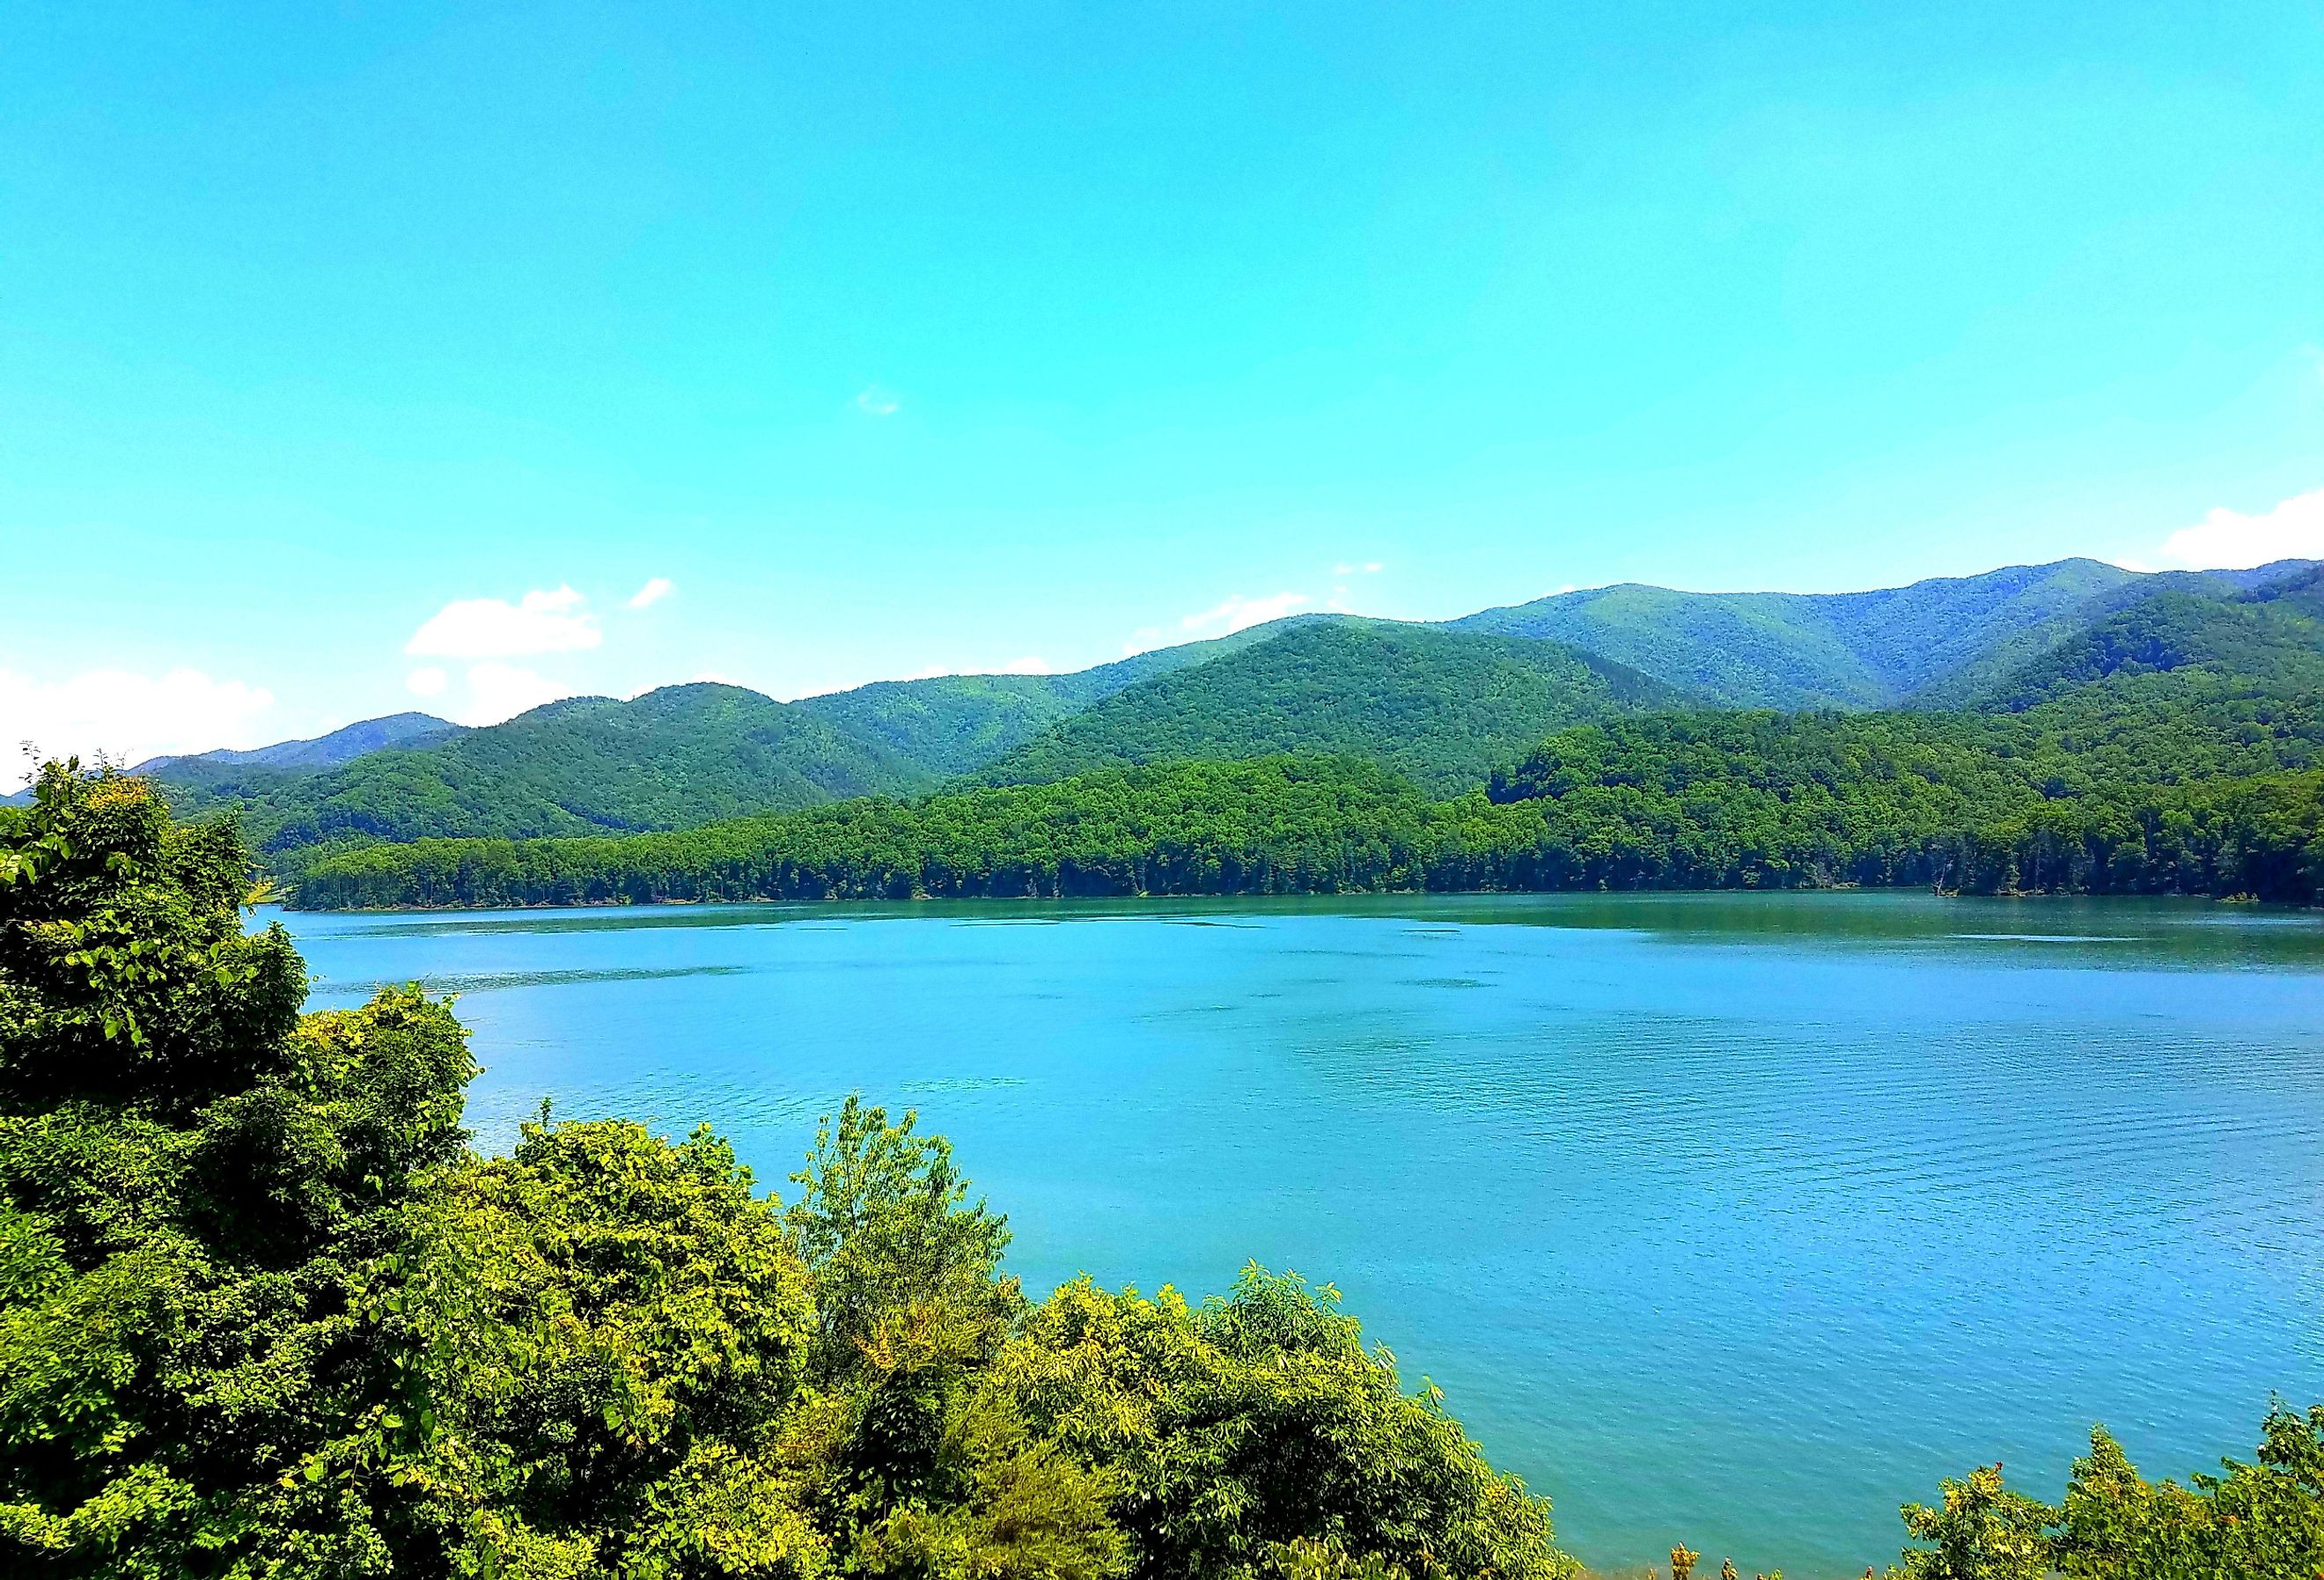 Overlook of Watauga Lake and the mountains in the background.